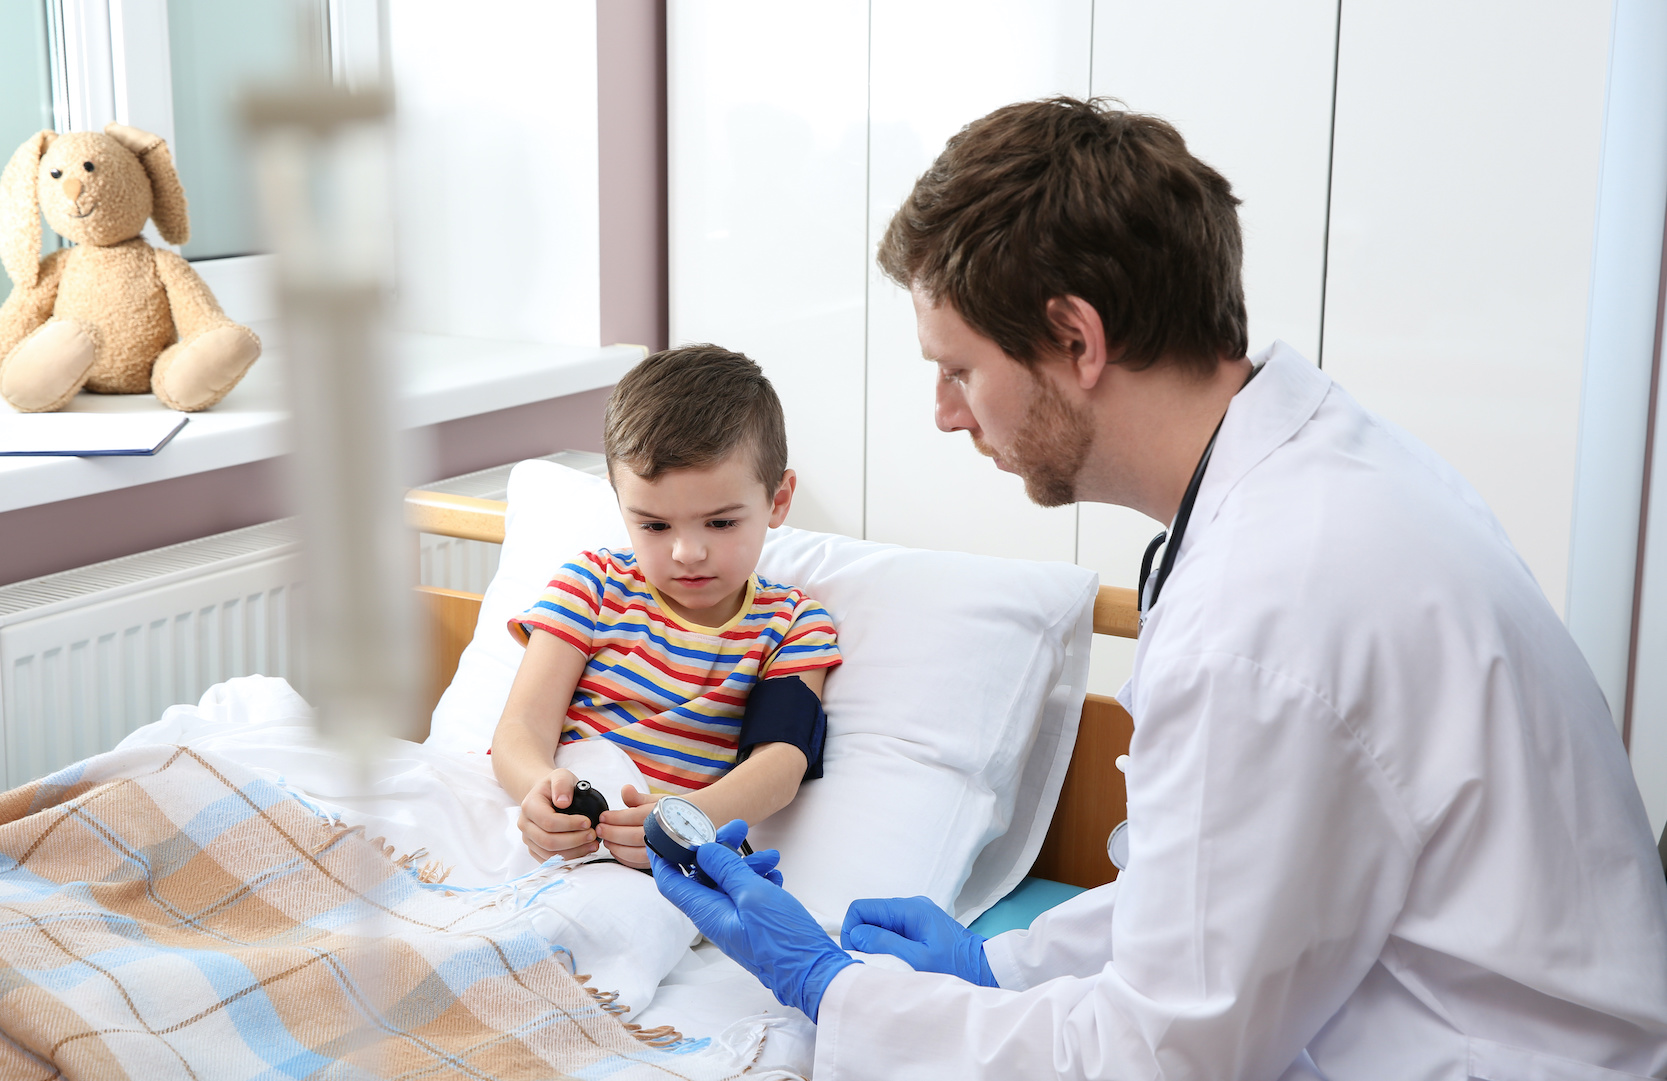 Doctor checking child’s blood pressure in hospital